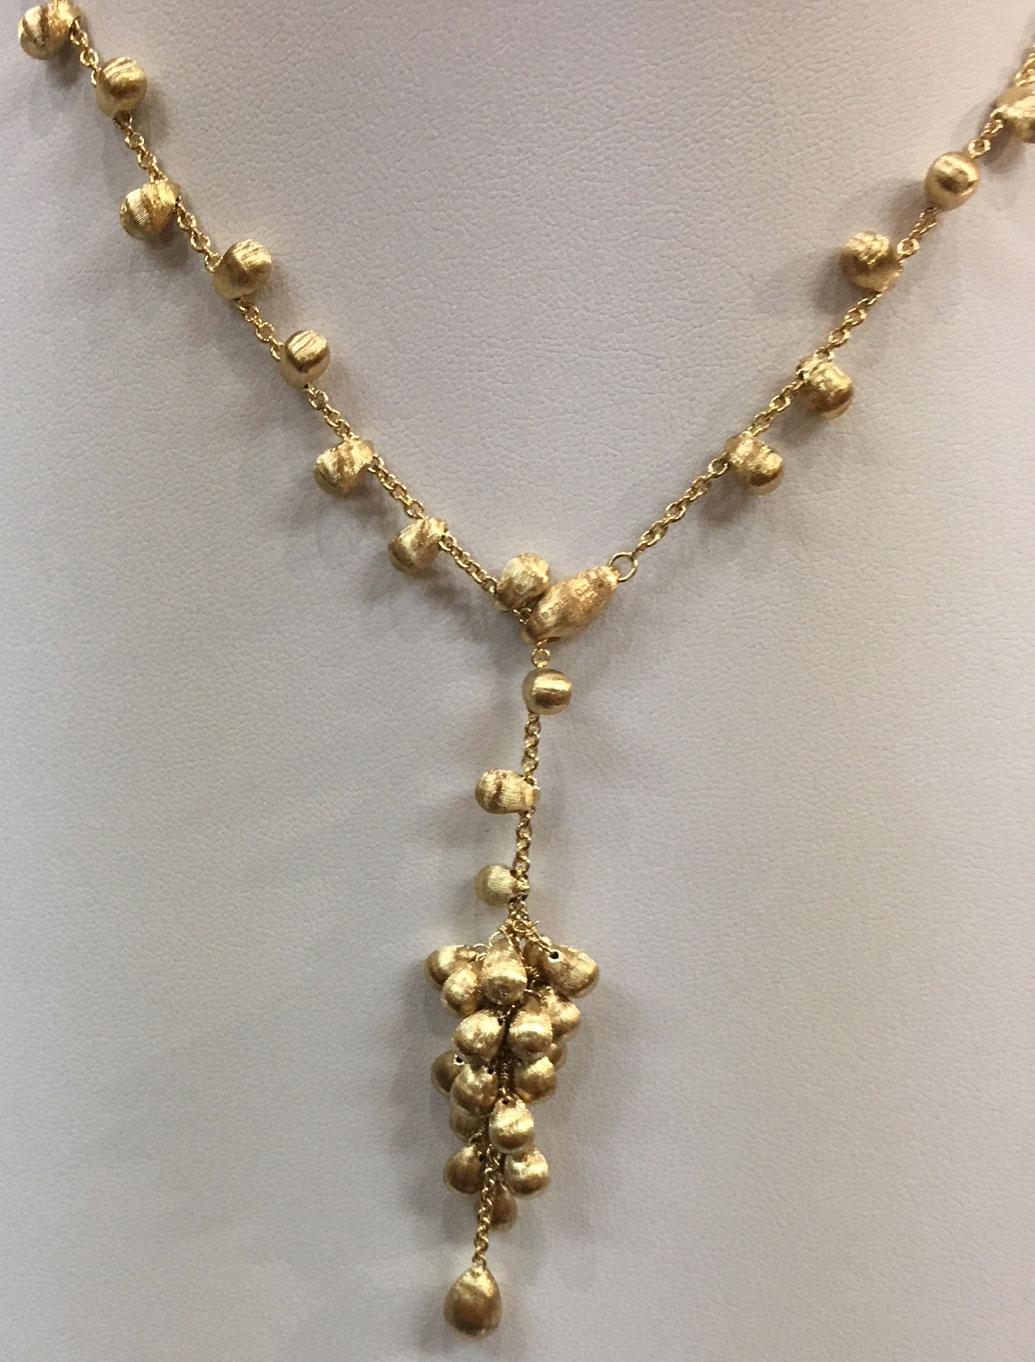 Beautiful Marco Bicego necklace features gold ‘nugget’ beads, crafted in 18-karat yellow held by a hinged clasp. Approx. 16” long, not including the cluster dangle. Necklace is signed and numbered. 
Marco Bicego: 